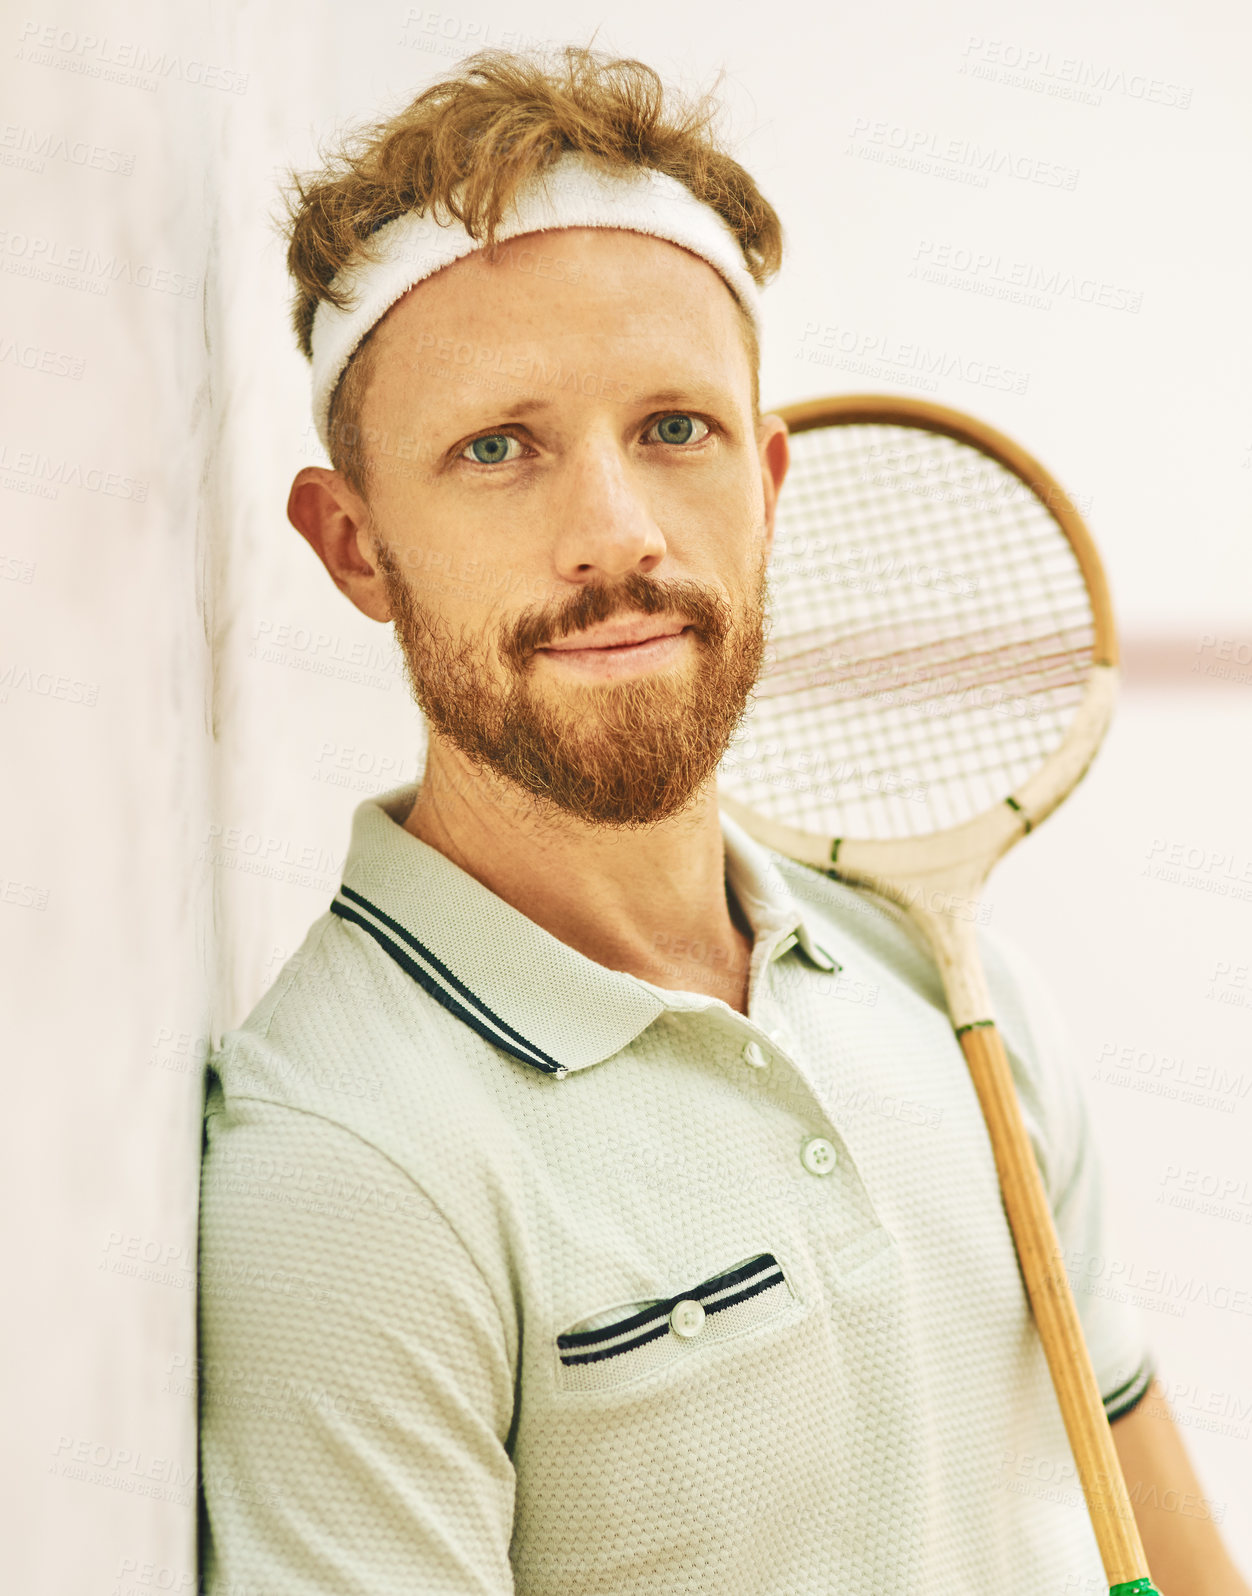 Buy stock photo Shot of a confident young man standing on a squash court